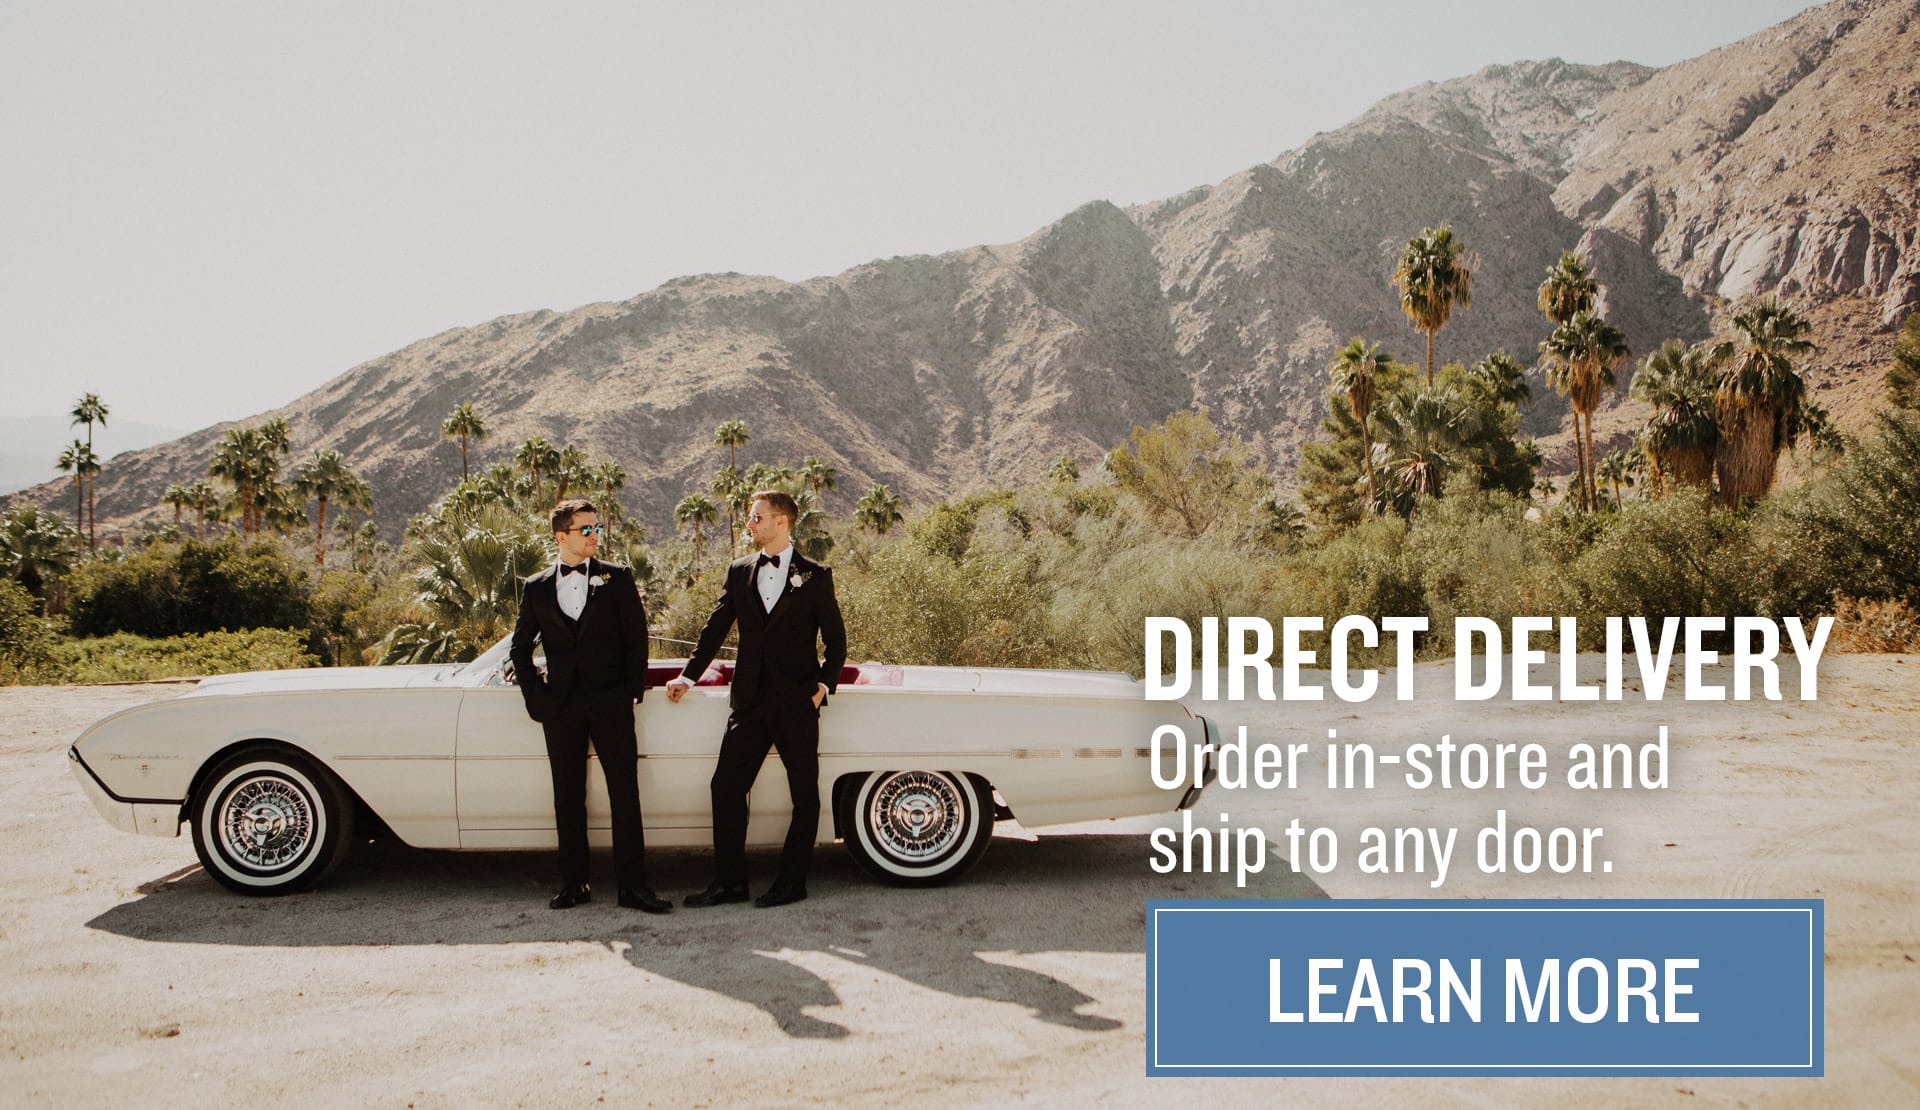 Benefit from personalized service in-store then ship the tuxedo or suit to your home.